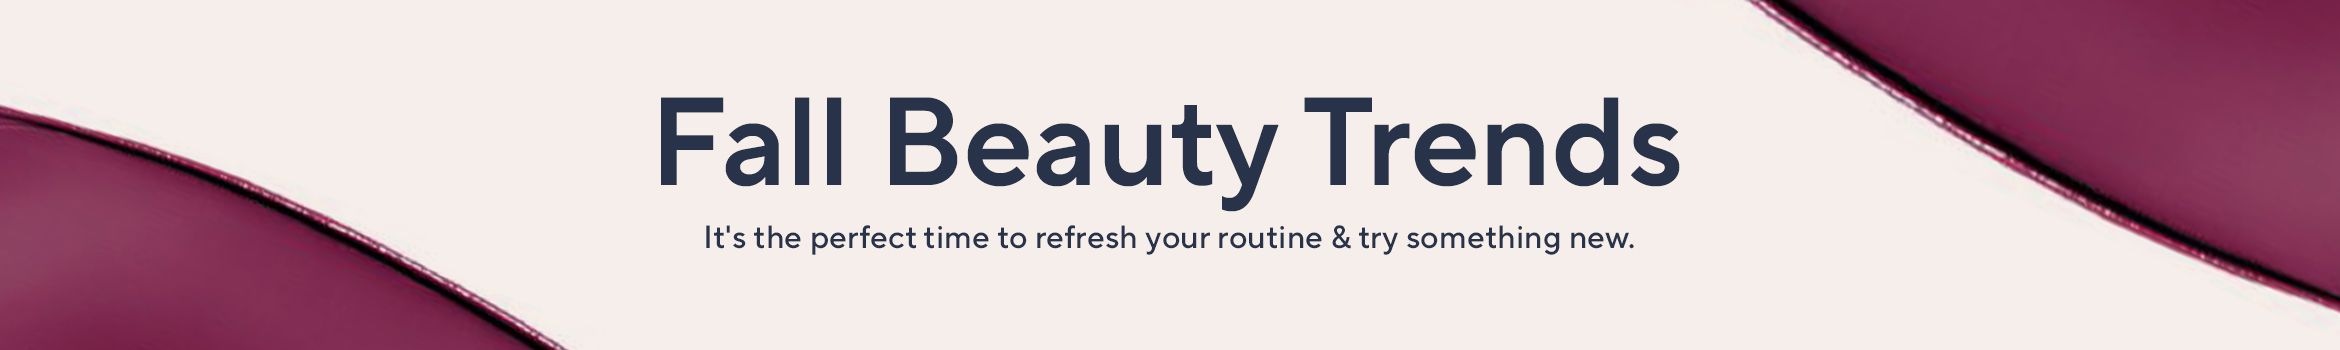 Fall Beauty Trends. It's the perfect time to refresh your routine & try something new.